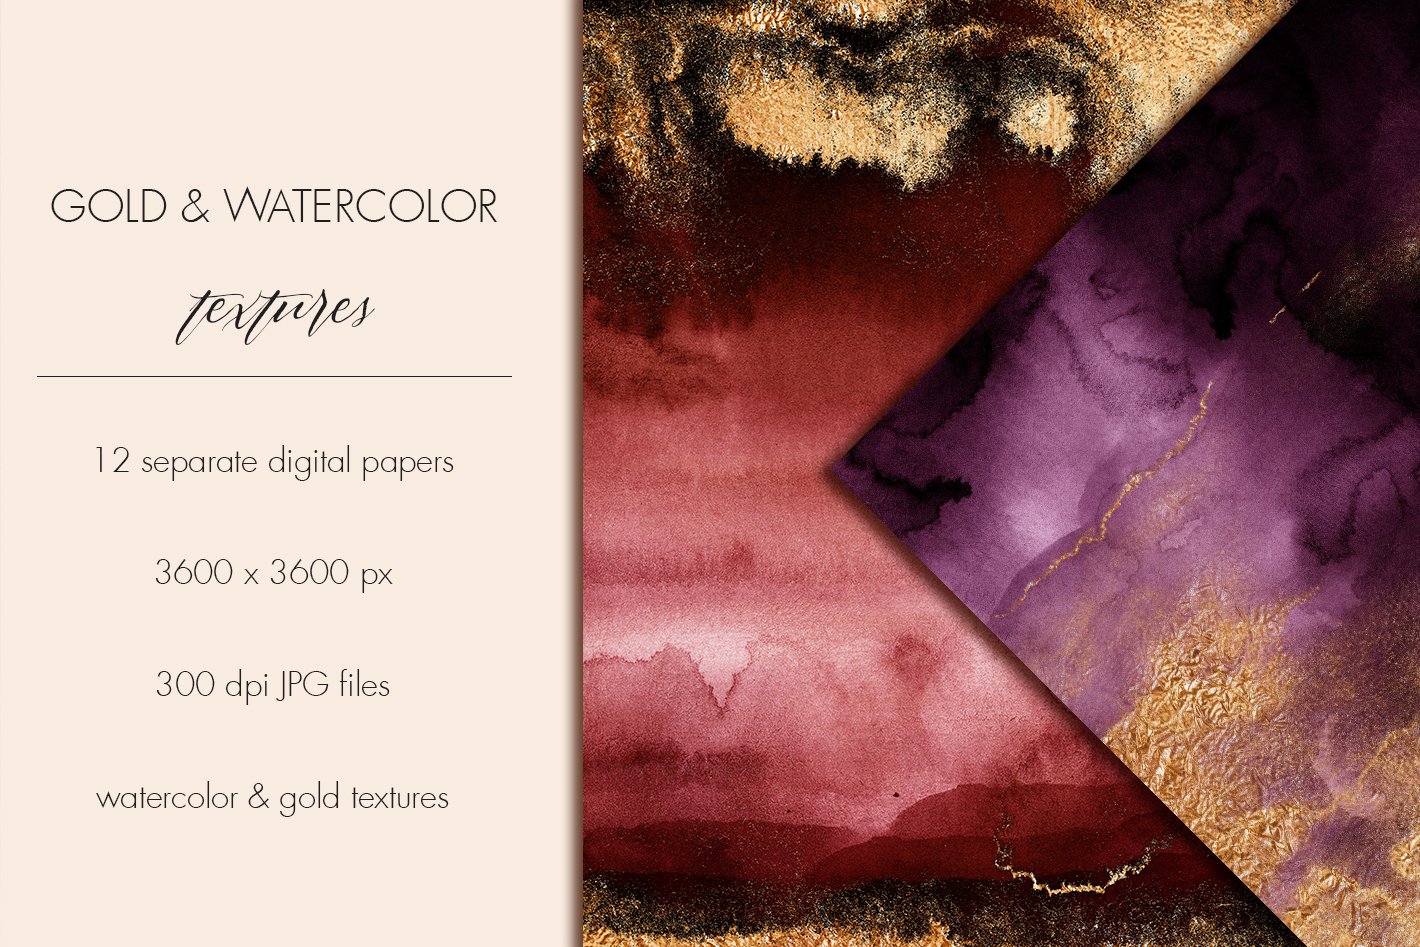 Bohemian watercolor & gold textures preview image.